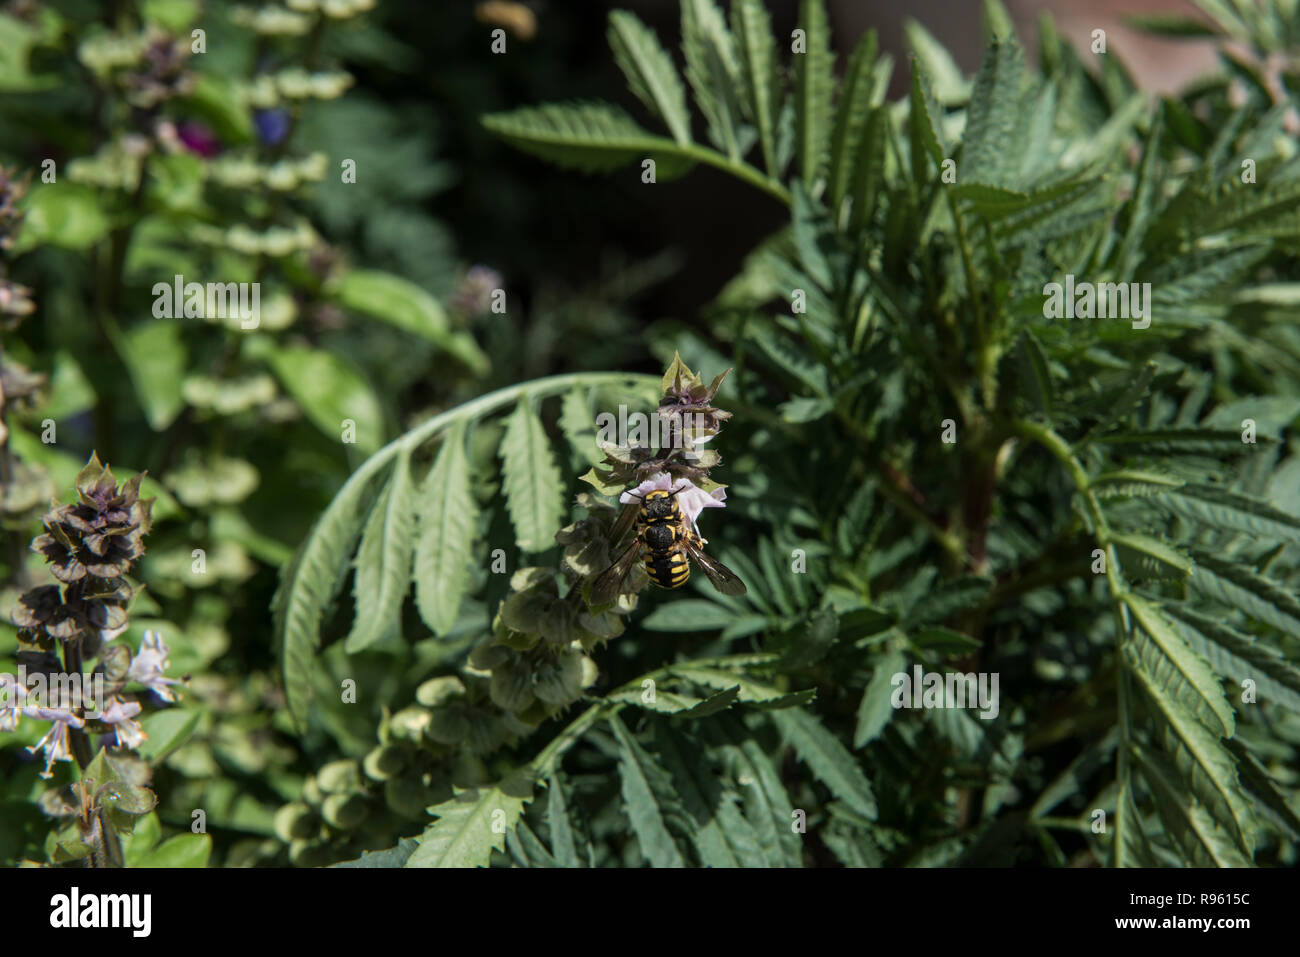 A honeybee is seen collecting the nectar from the flowers of a local plant. The lush green leaves are seen on the background along with the flowers. Stock Photo